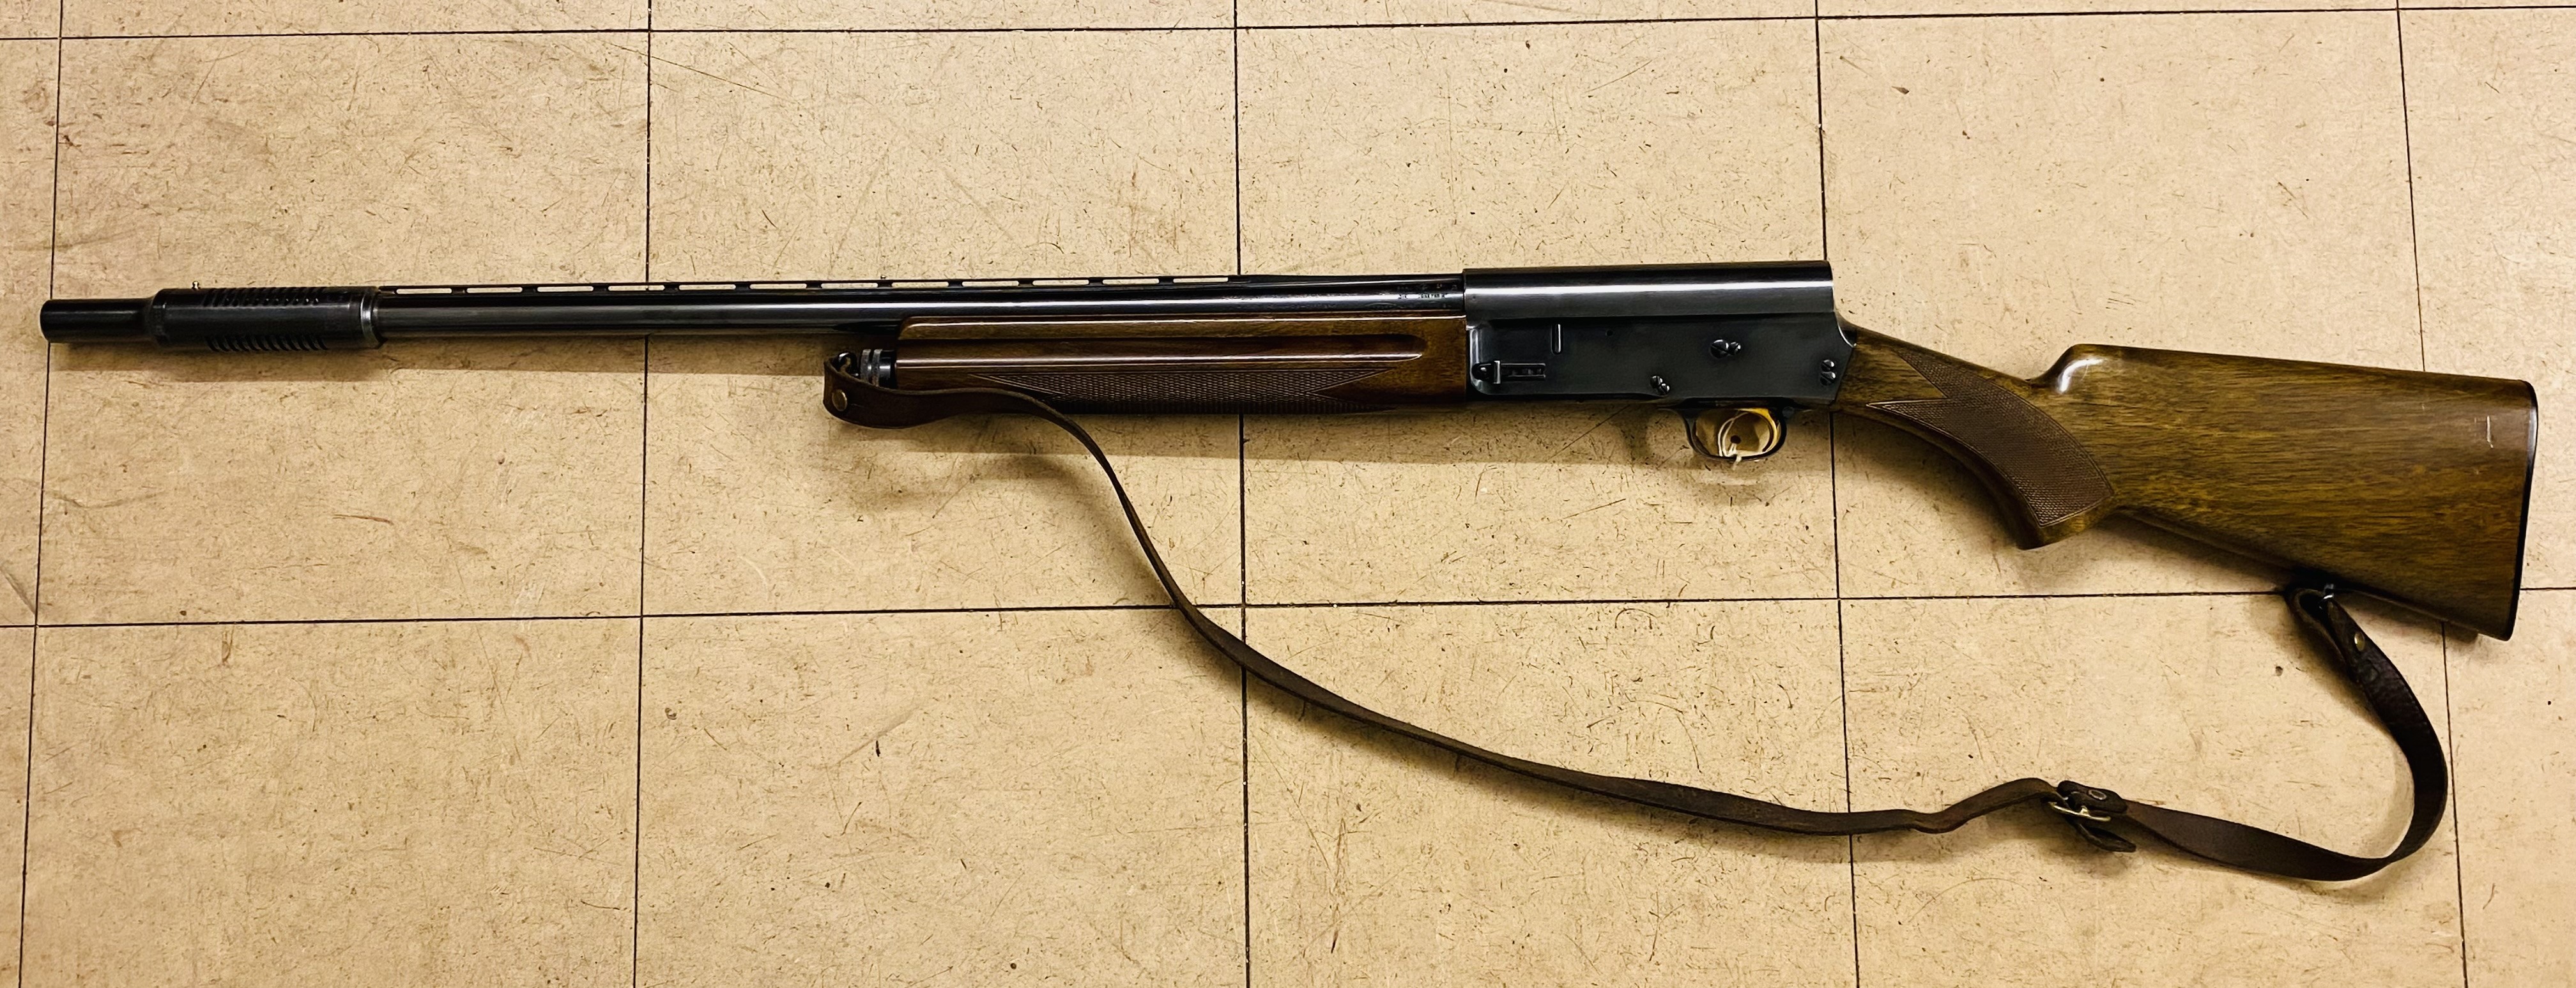 Browning A-5 self loading 12 bore shotgun, with set of Cutts compensators